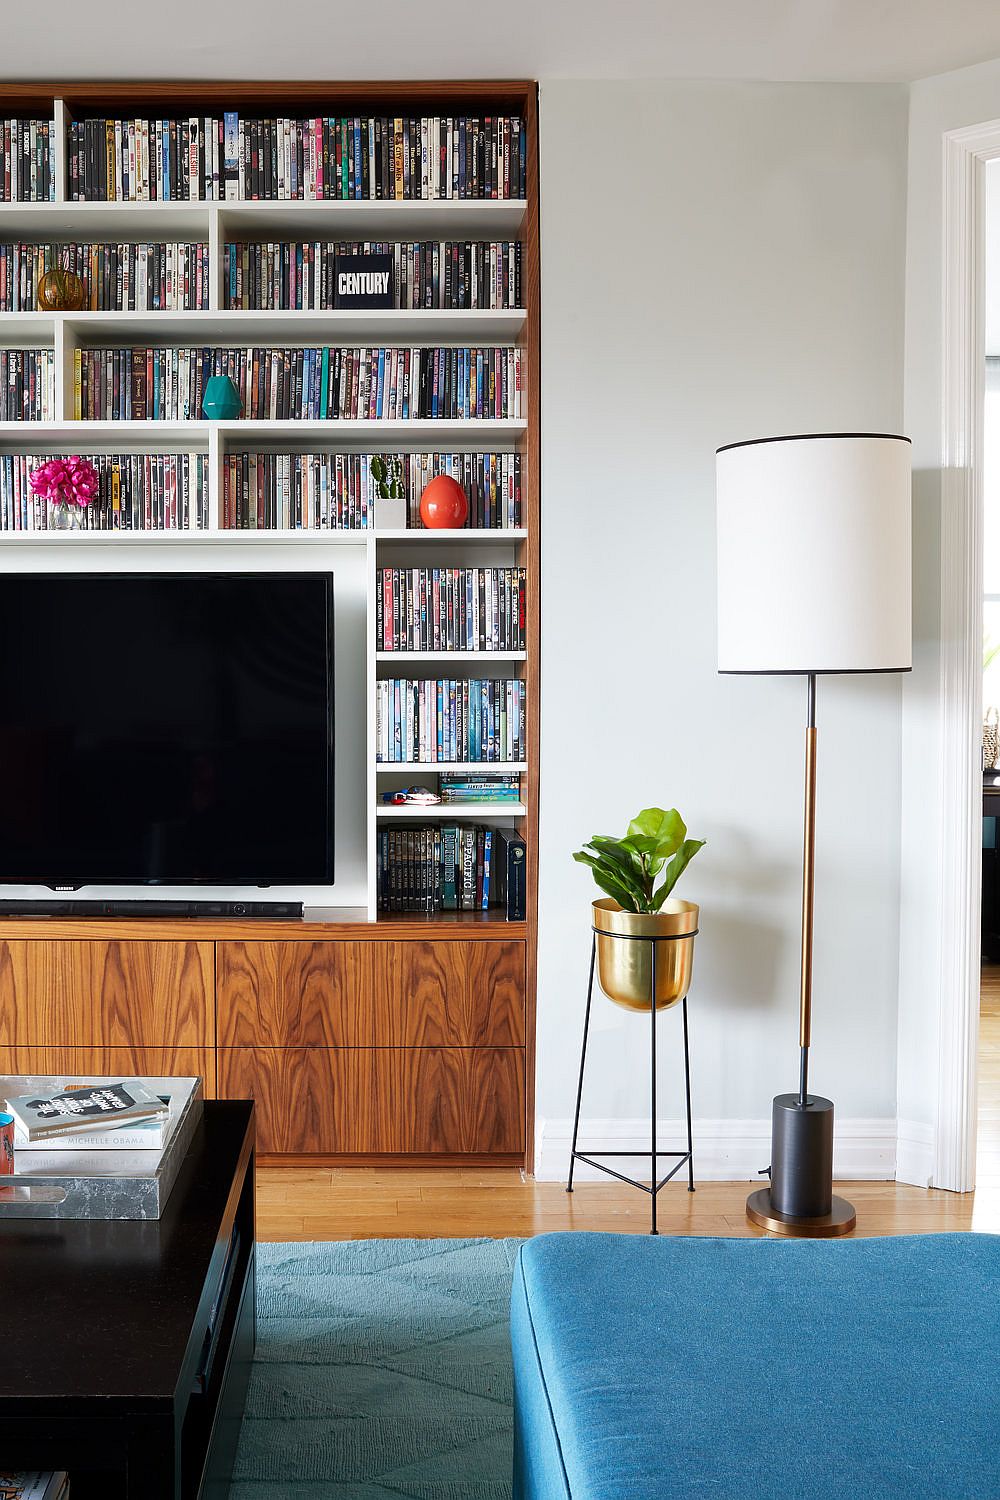 Bookshelf-and-TV-space-in-the-living-room-of-the-NYC-home-become-the-focal-point-74248